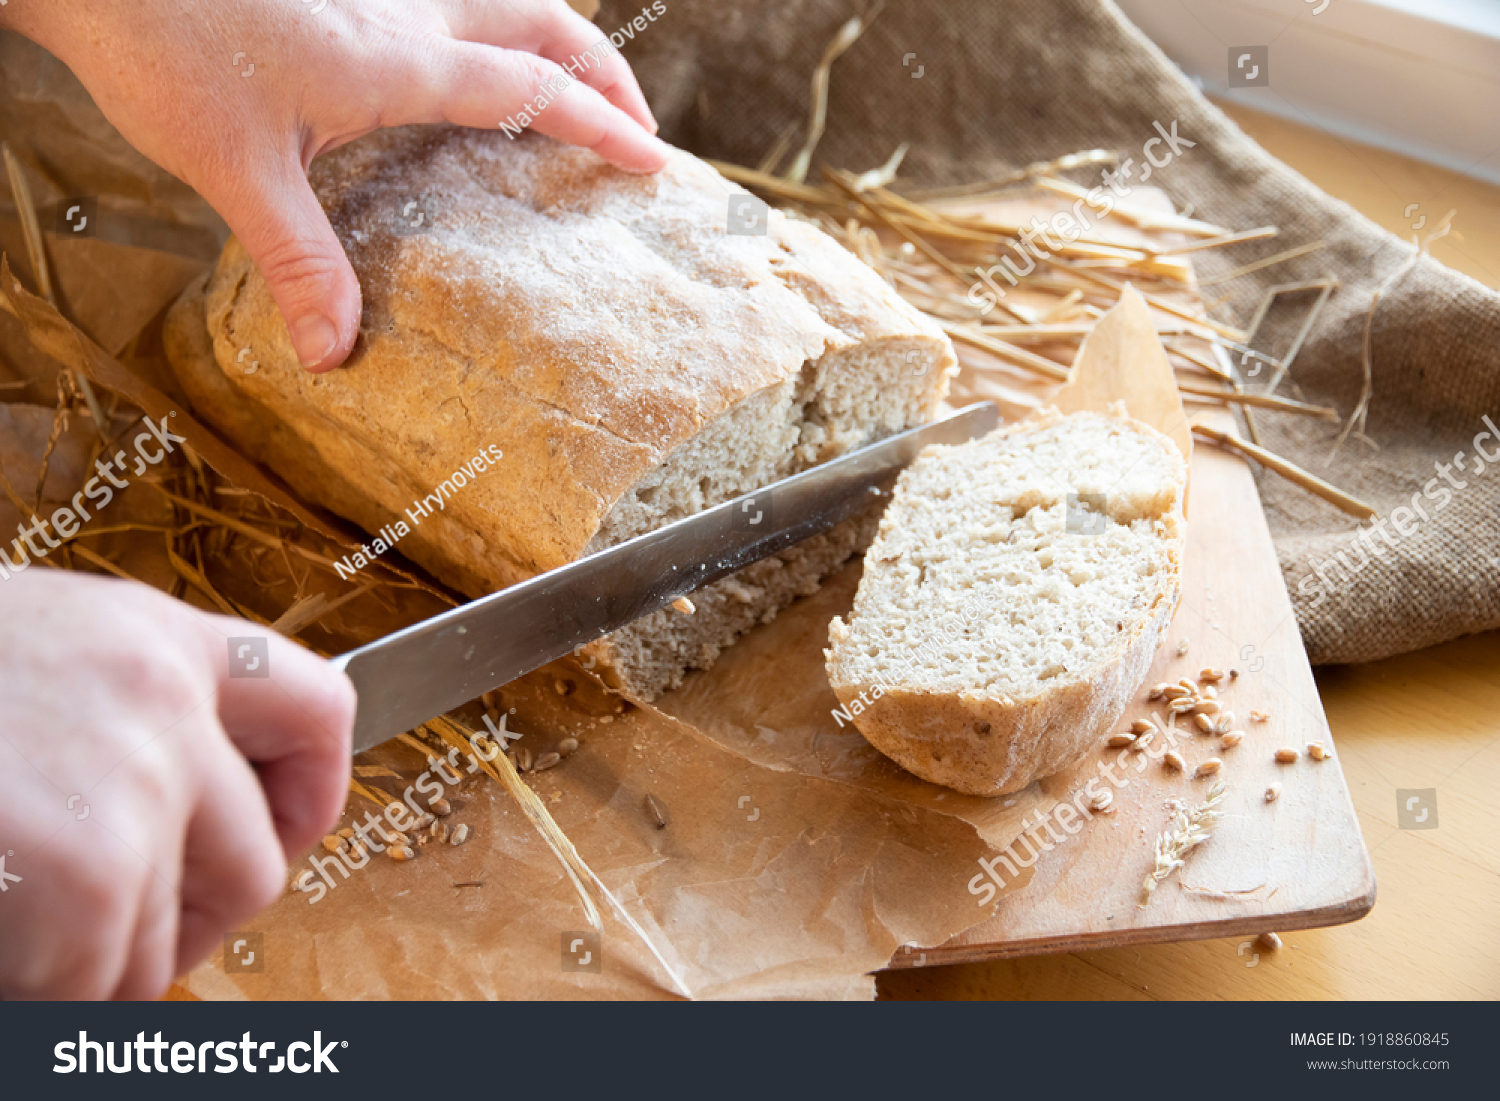 Woman slices fresh bread. hands with a knife. Freshly baked rye bread on a wooden board. Burlap, craft paper and straw on the background. Organic bread baked at home from wheat flour. Sliced bread. #1918860845